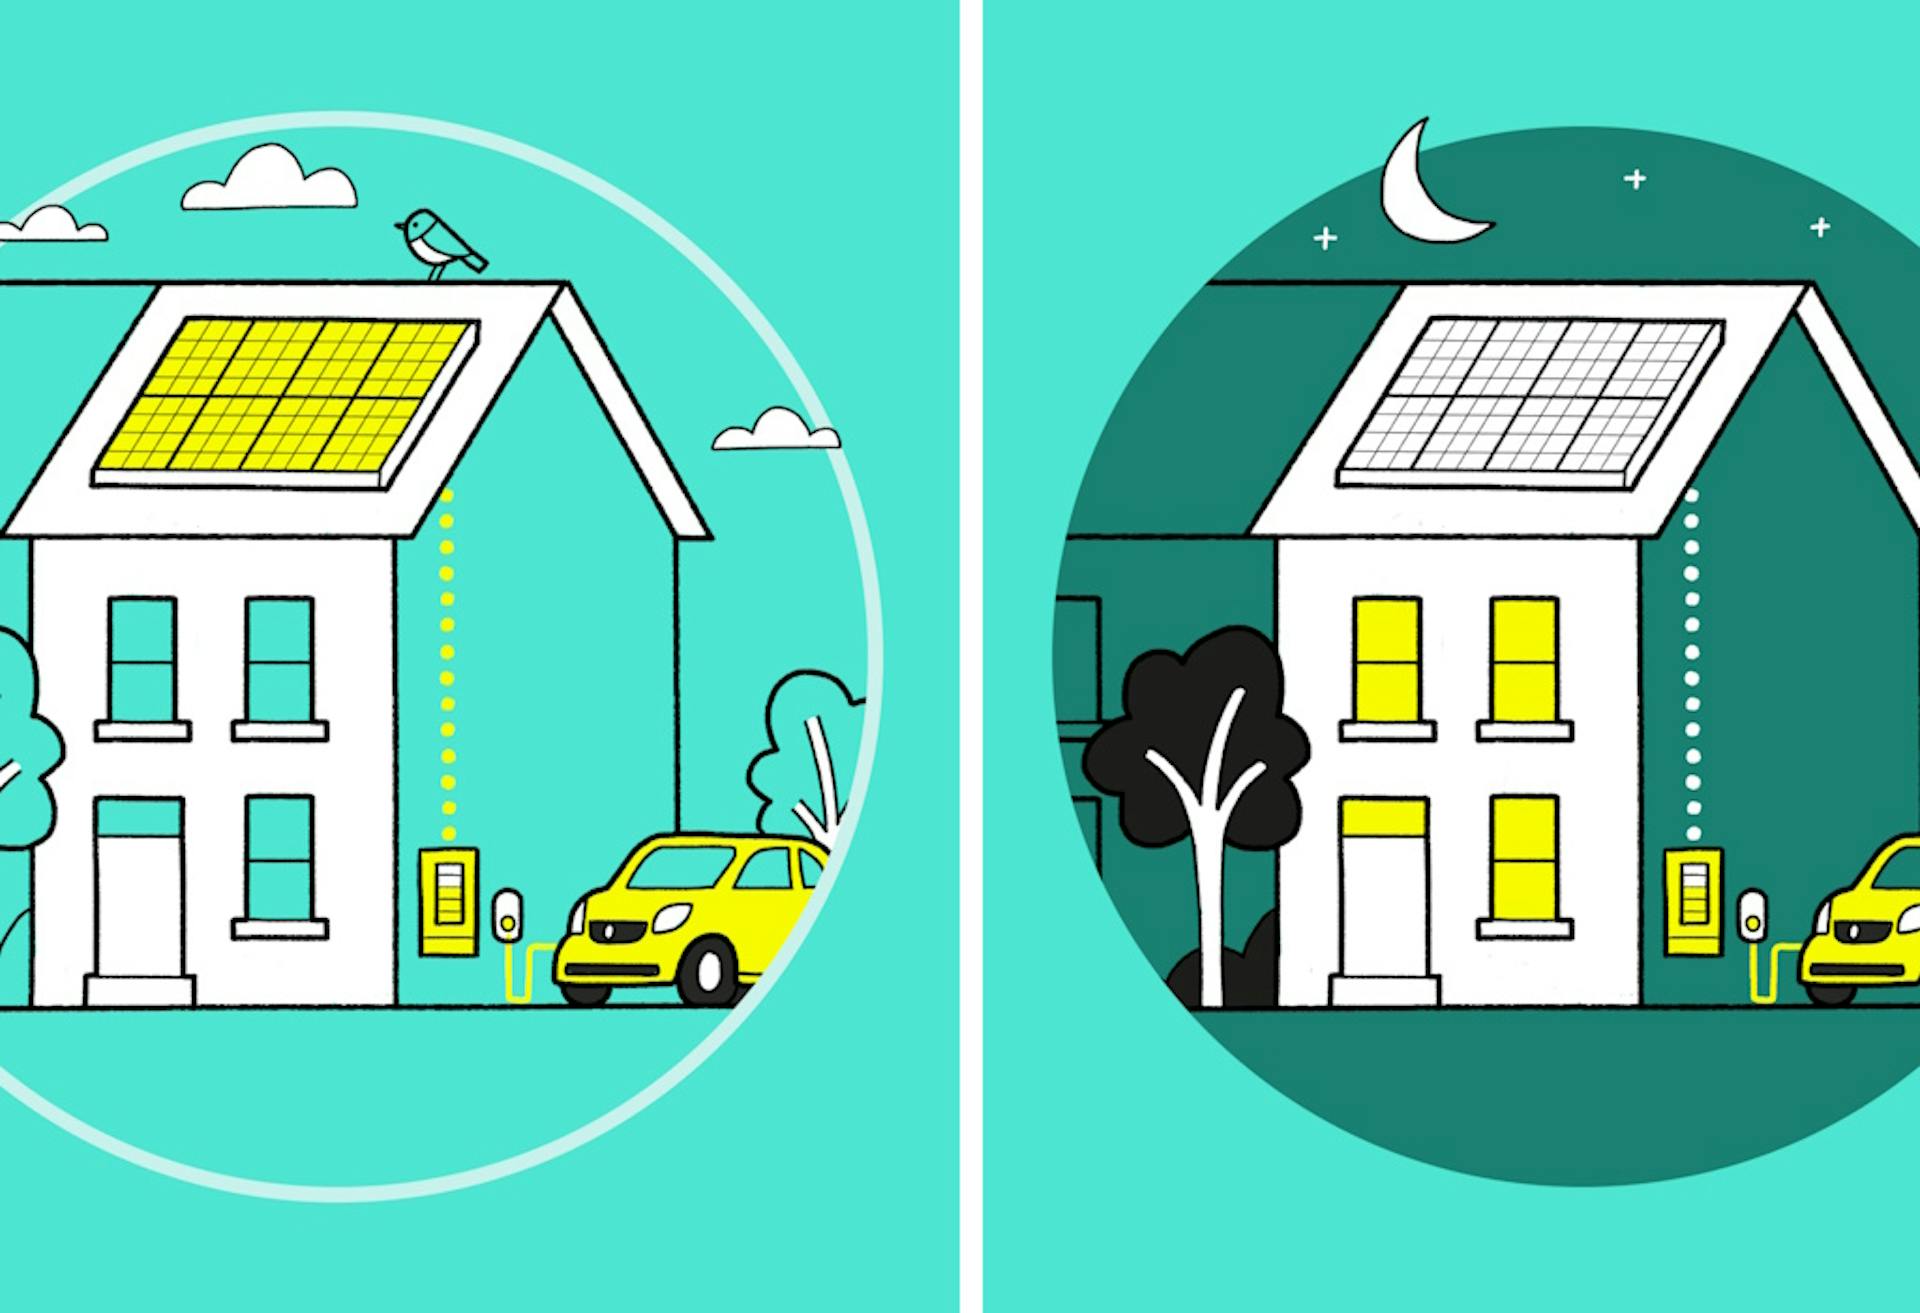 A graphic with two views of a white house, in circles, either side of a vertical white line. The house has solar panels, an electric vehicle, and an EV charger. One of the images is set during the day - the solar panels are yellow and the windows are blue - and the other is set at night, with white solar panels and yellow light in the windows. The background is aquamarine.